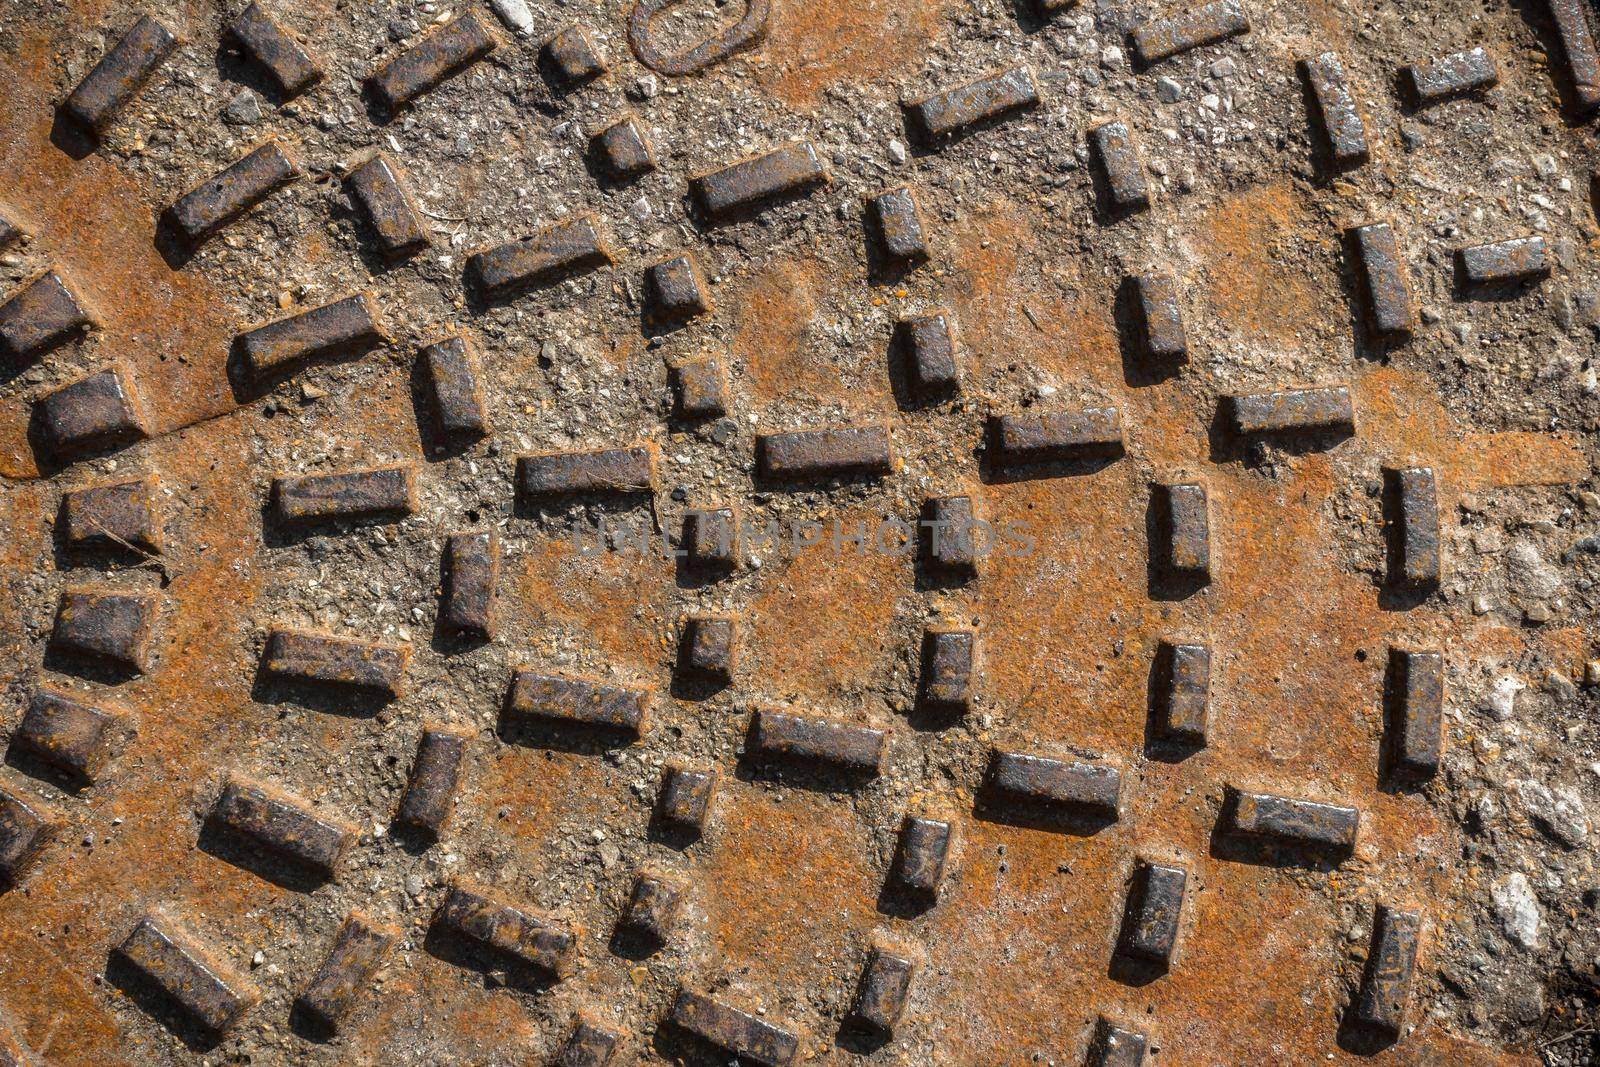 Rusty sewer manhole cover by germanopoli